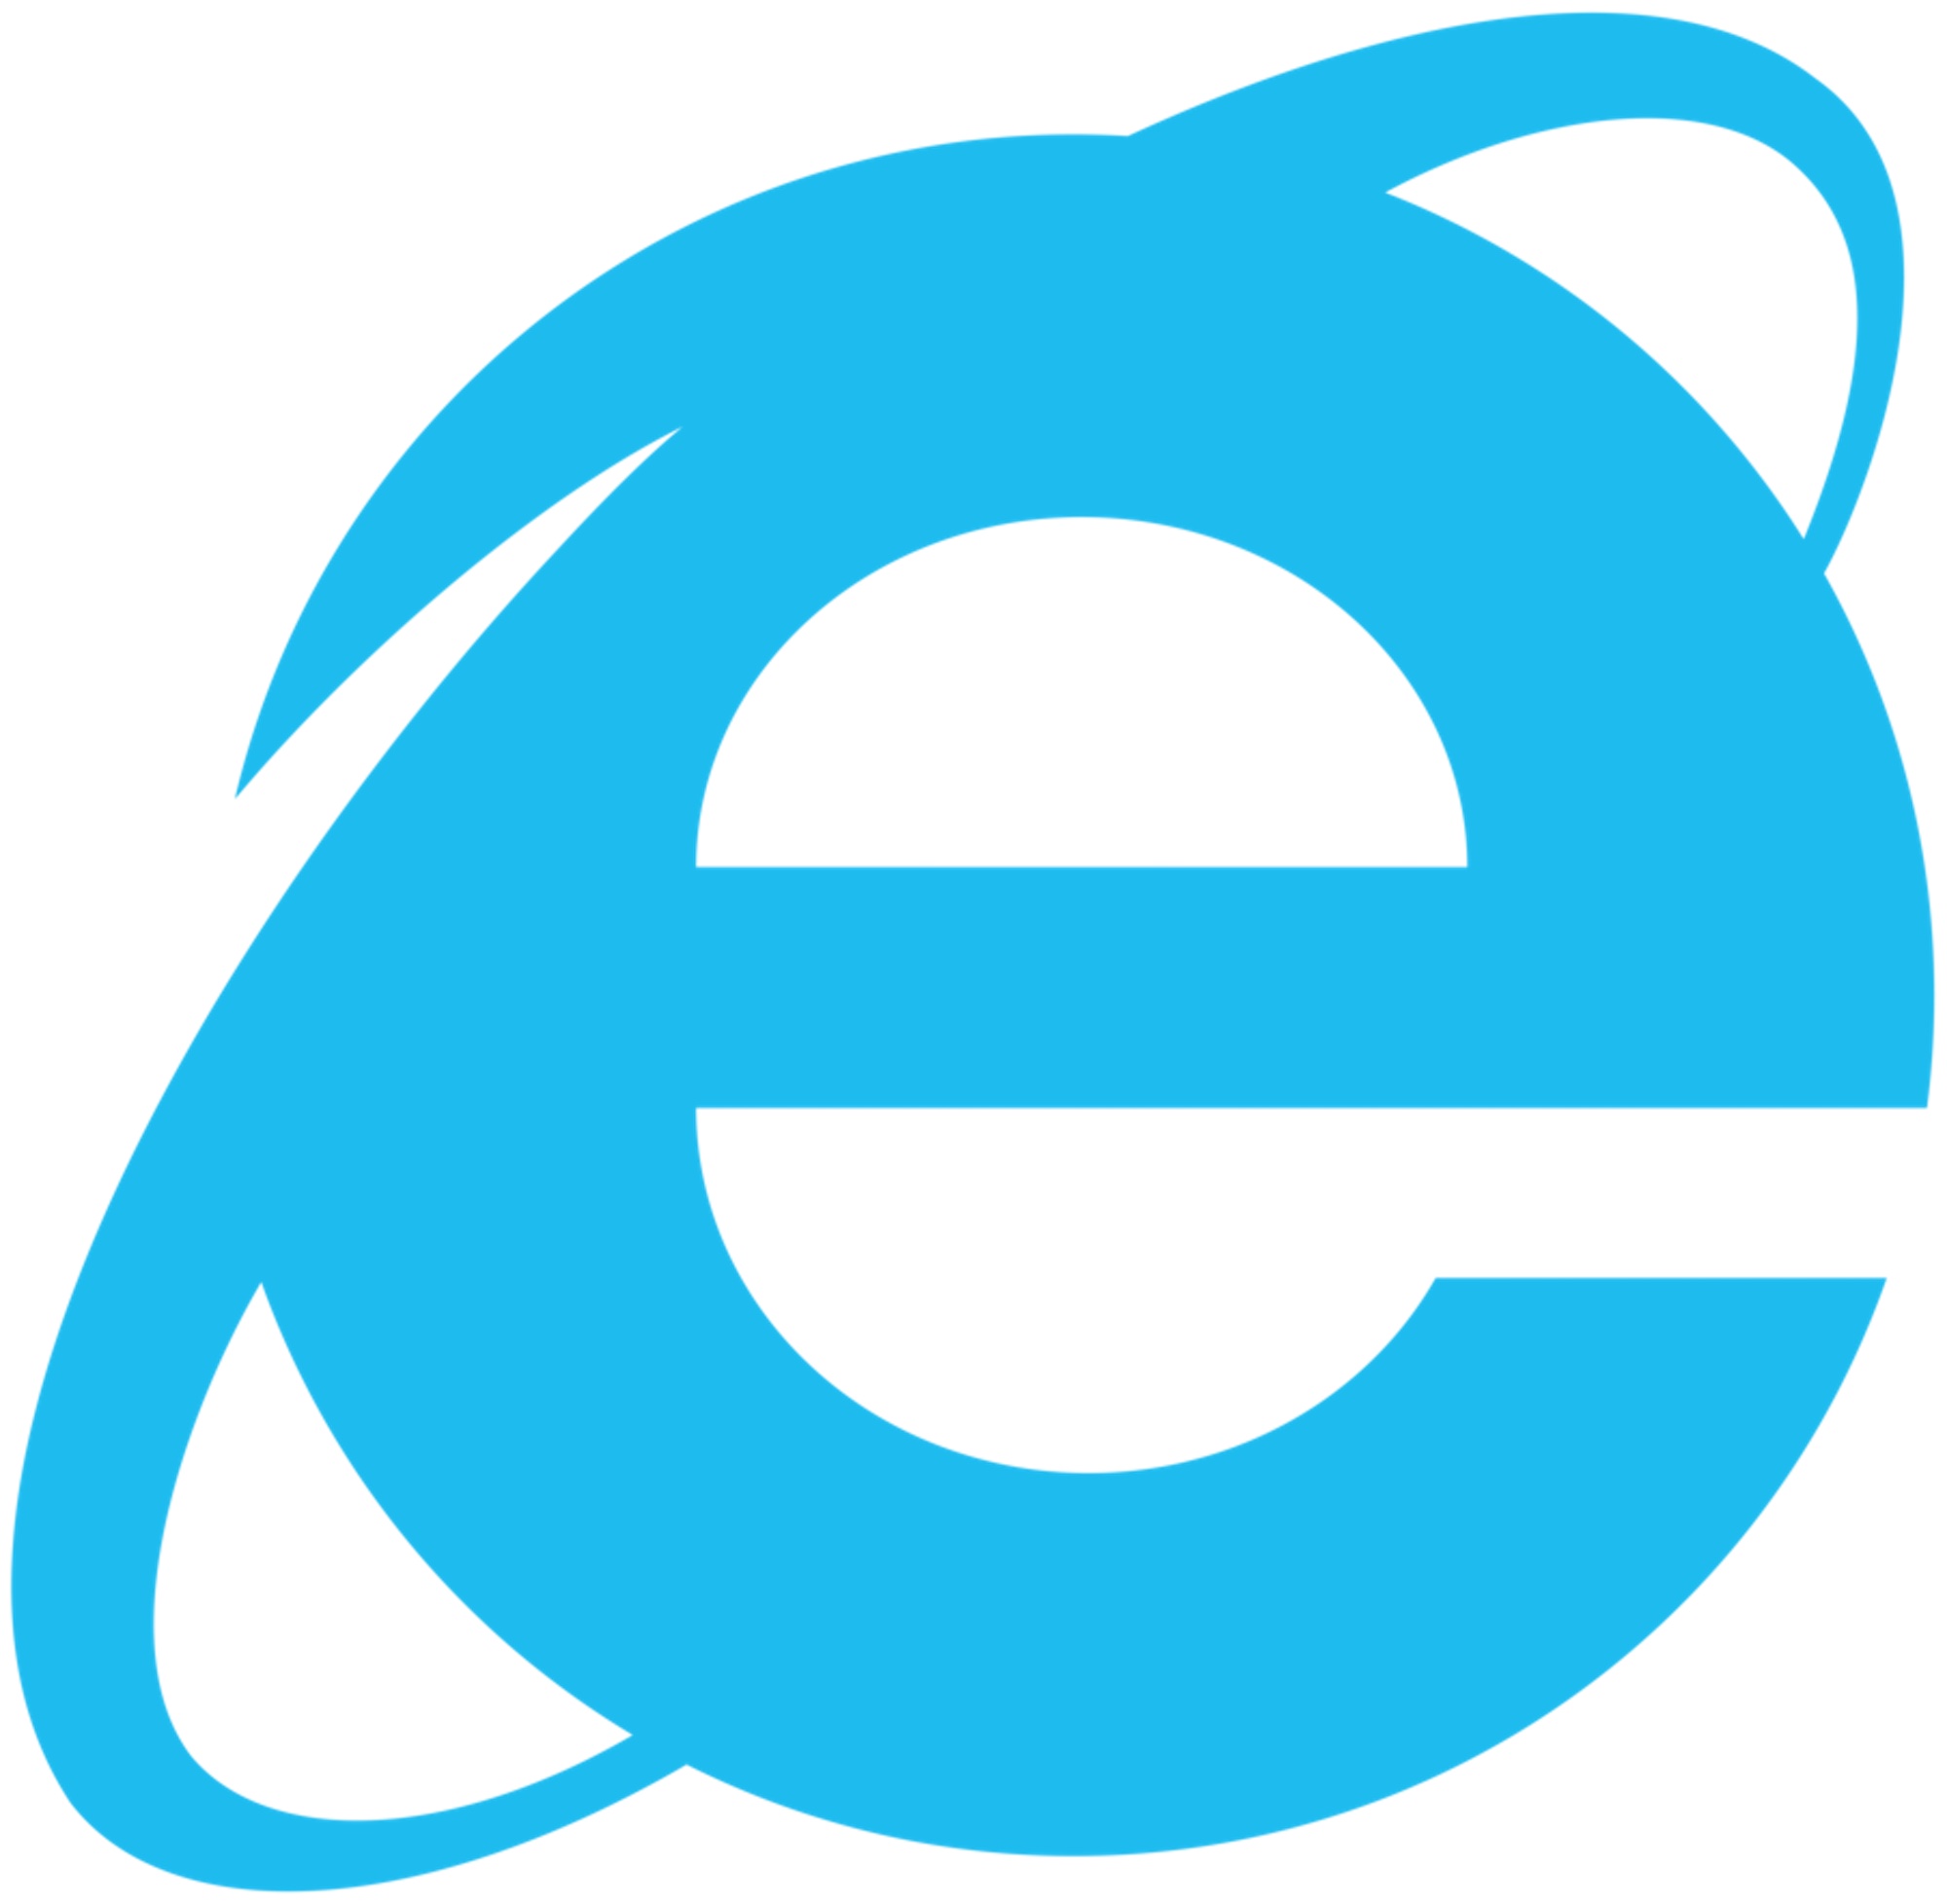 How To Use Internet Explorer 11 In Mac Os X The Easy Way Osxdaily